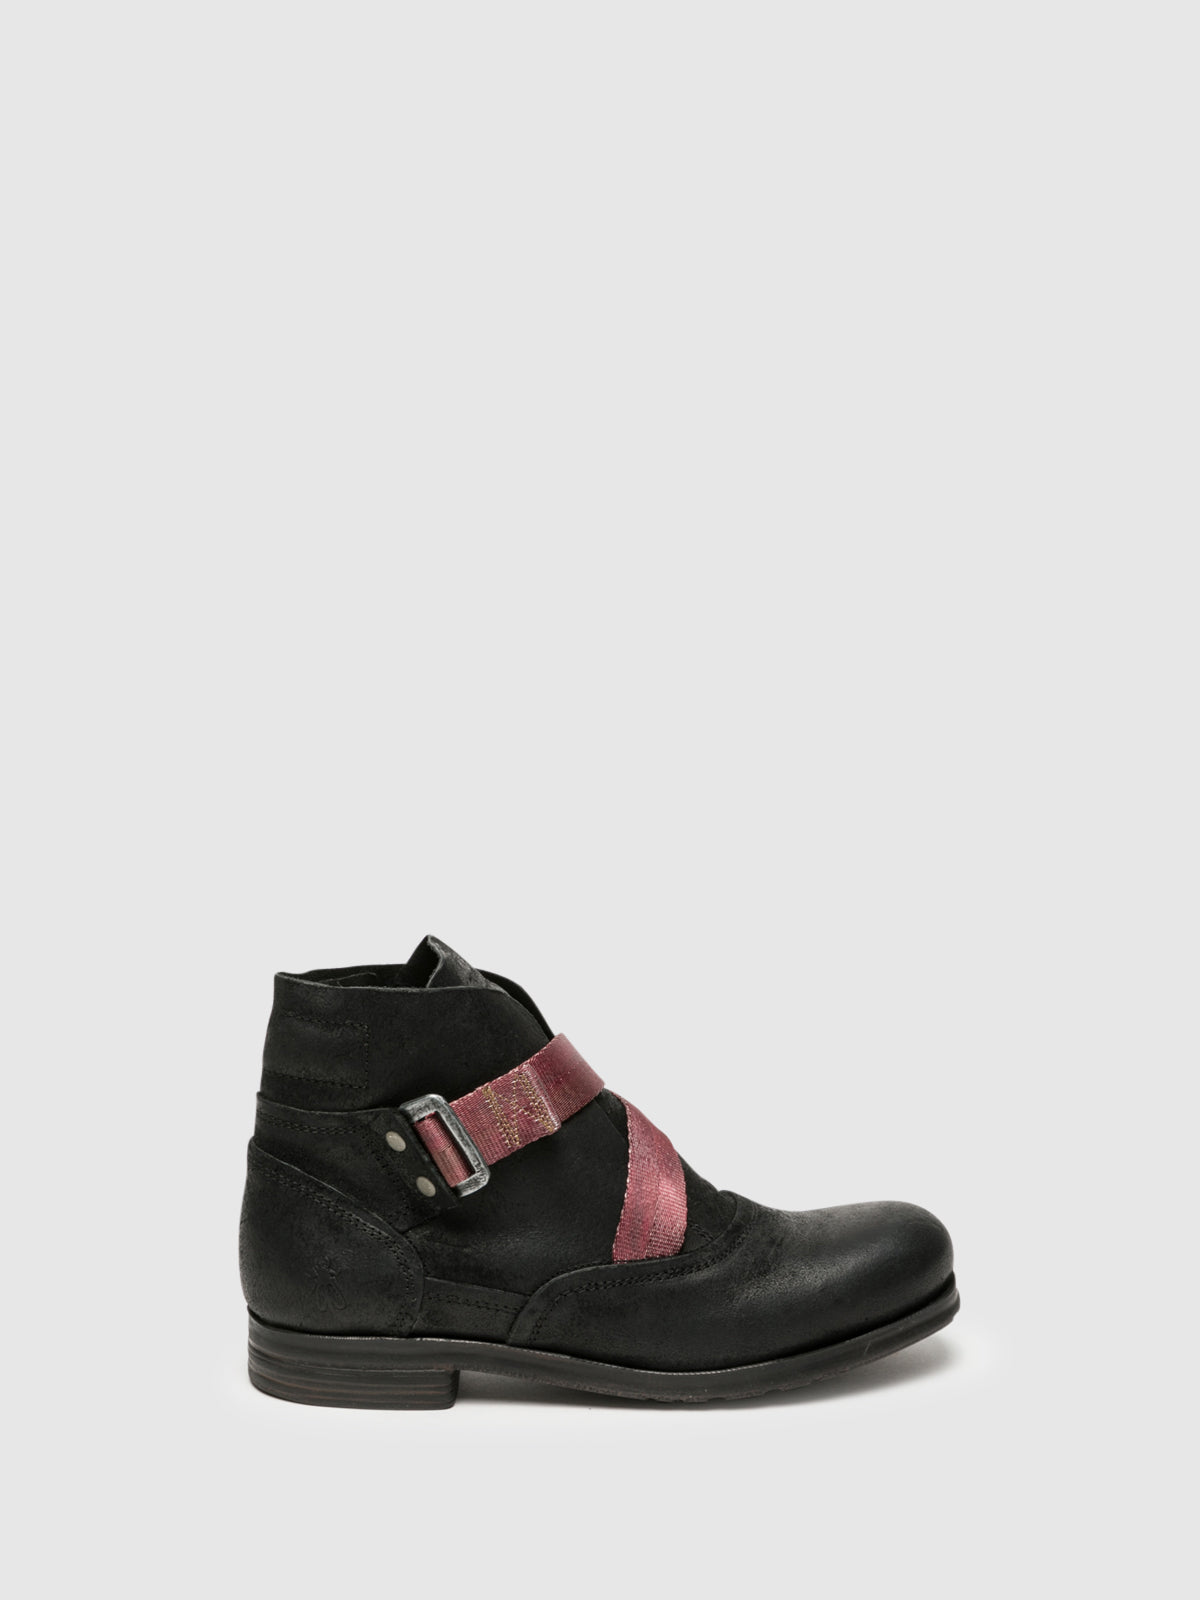 Fly London Coal Black Buckle Ankle Boots